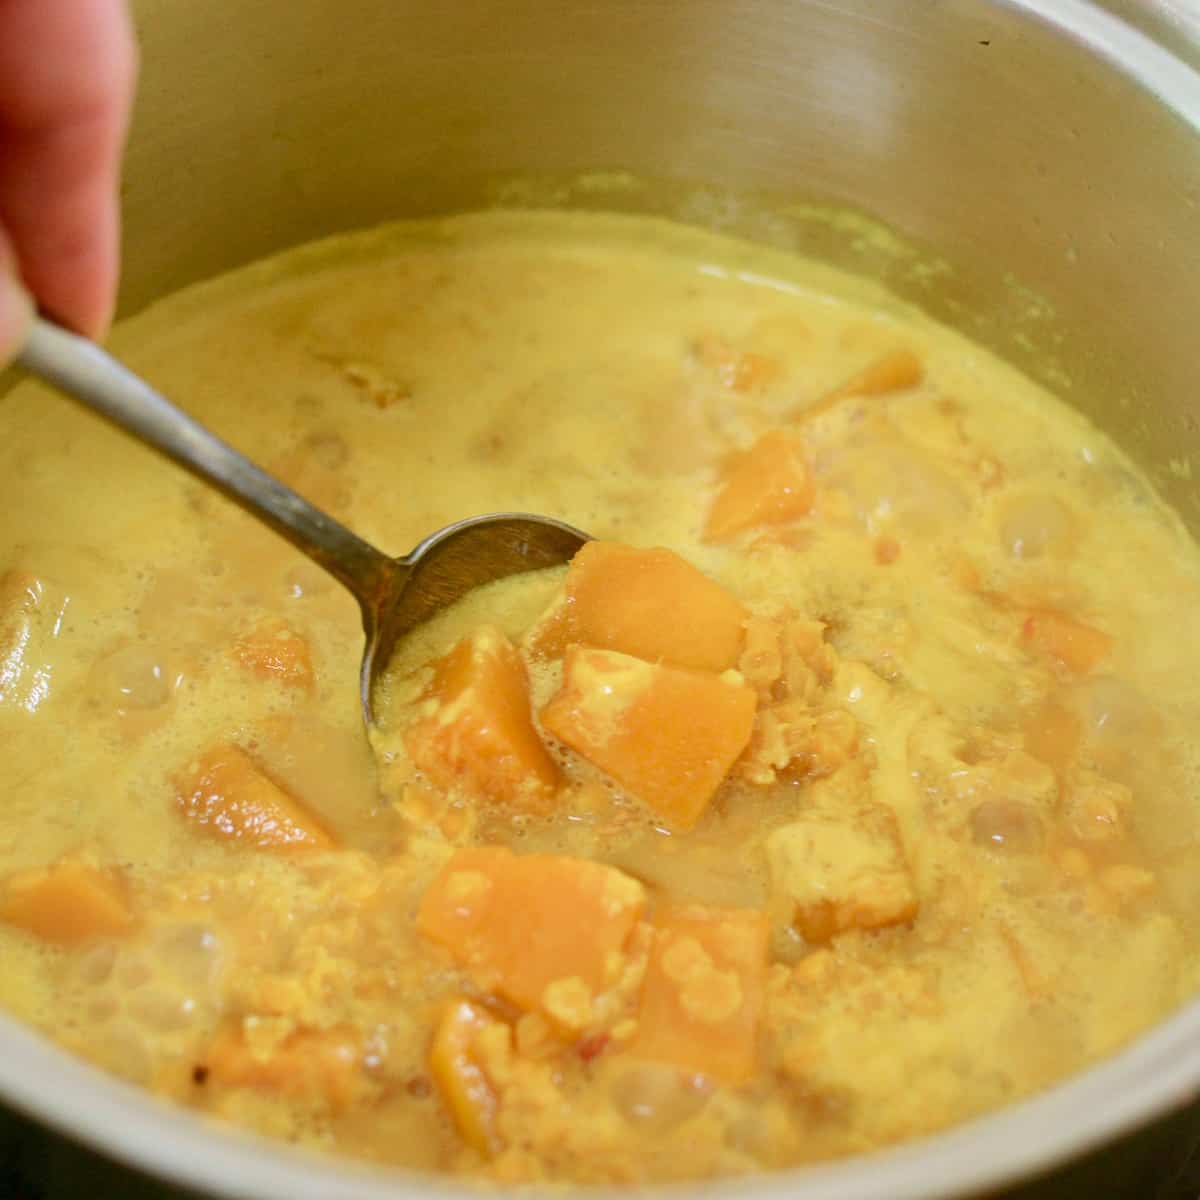 A spoon lifts some cubes of pumpkin from the saucepan, to check if they are soft.